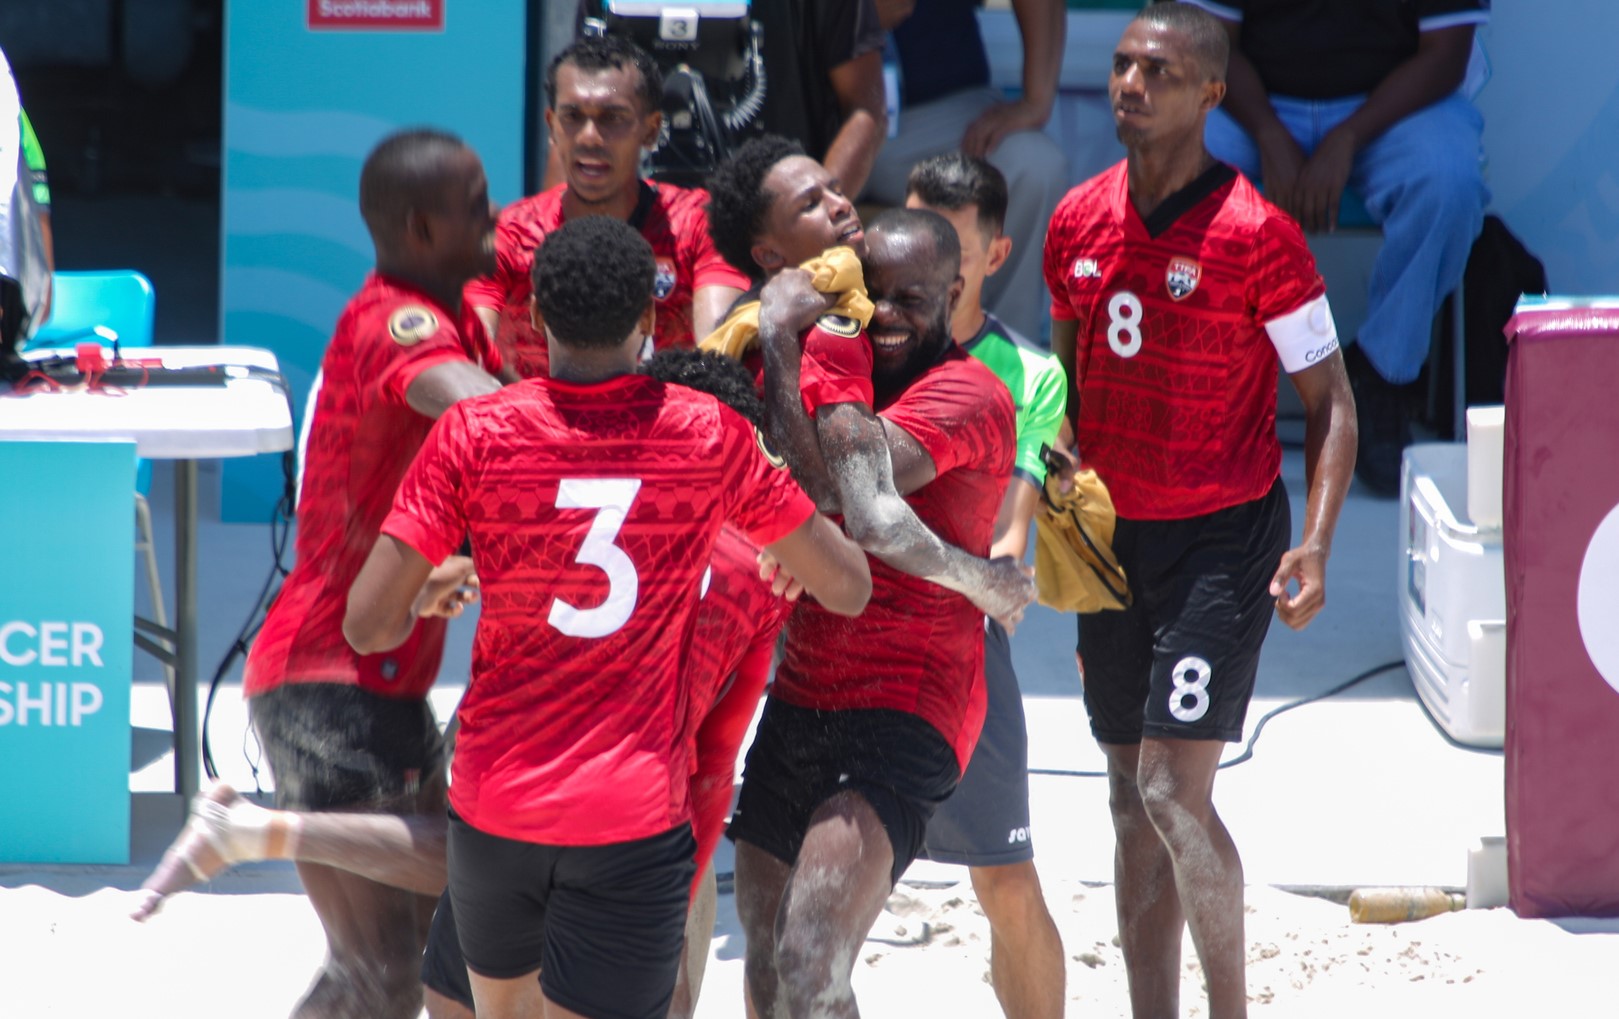 Trinidad and Tobago players celebrate their qualification to the quarterfinals of the Concacaf Beach Soccer Championship in Nassau, Bahamas after defeating the Dominican Republic on May 10, 2023.